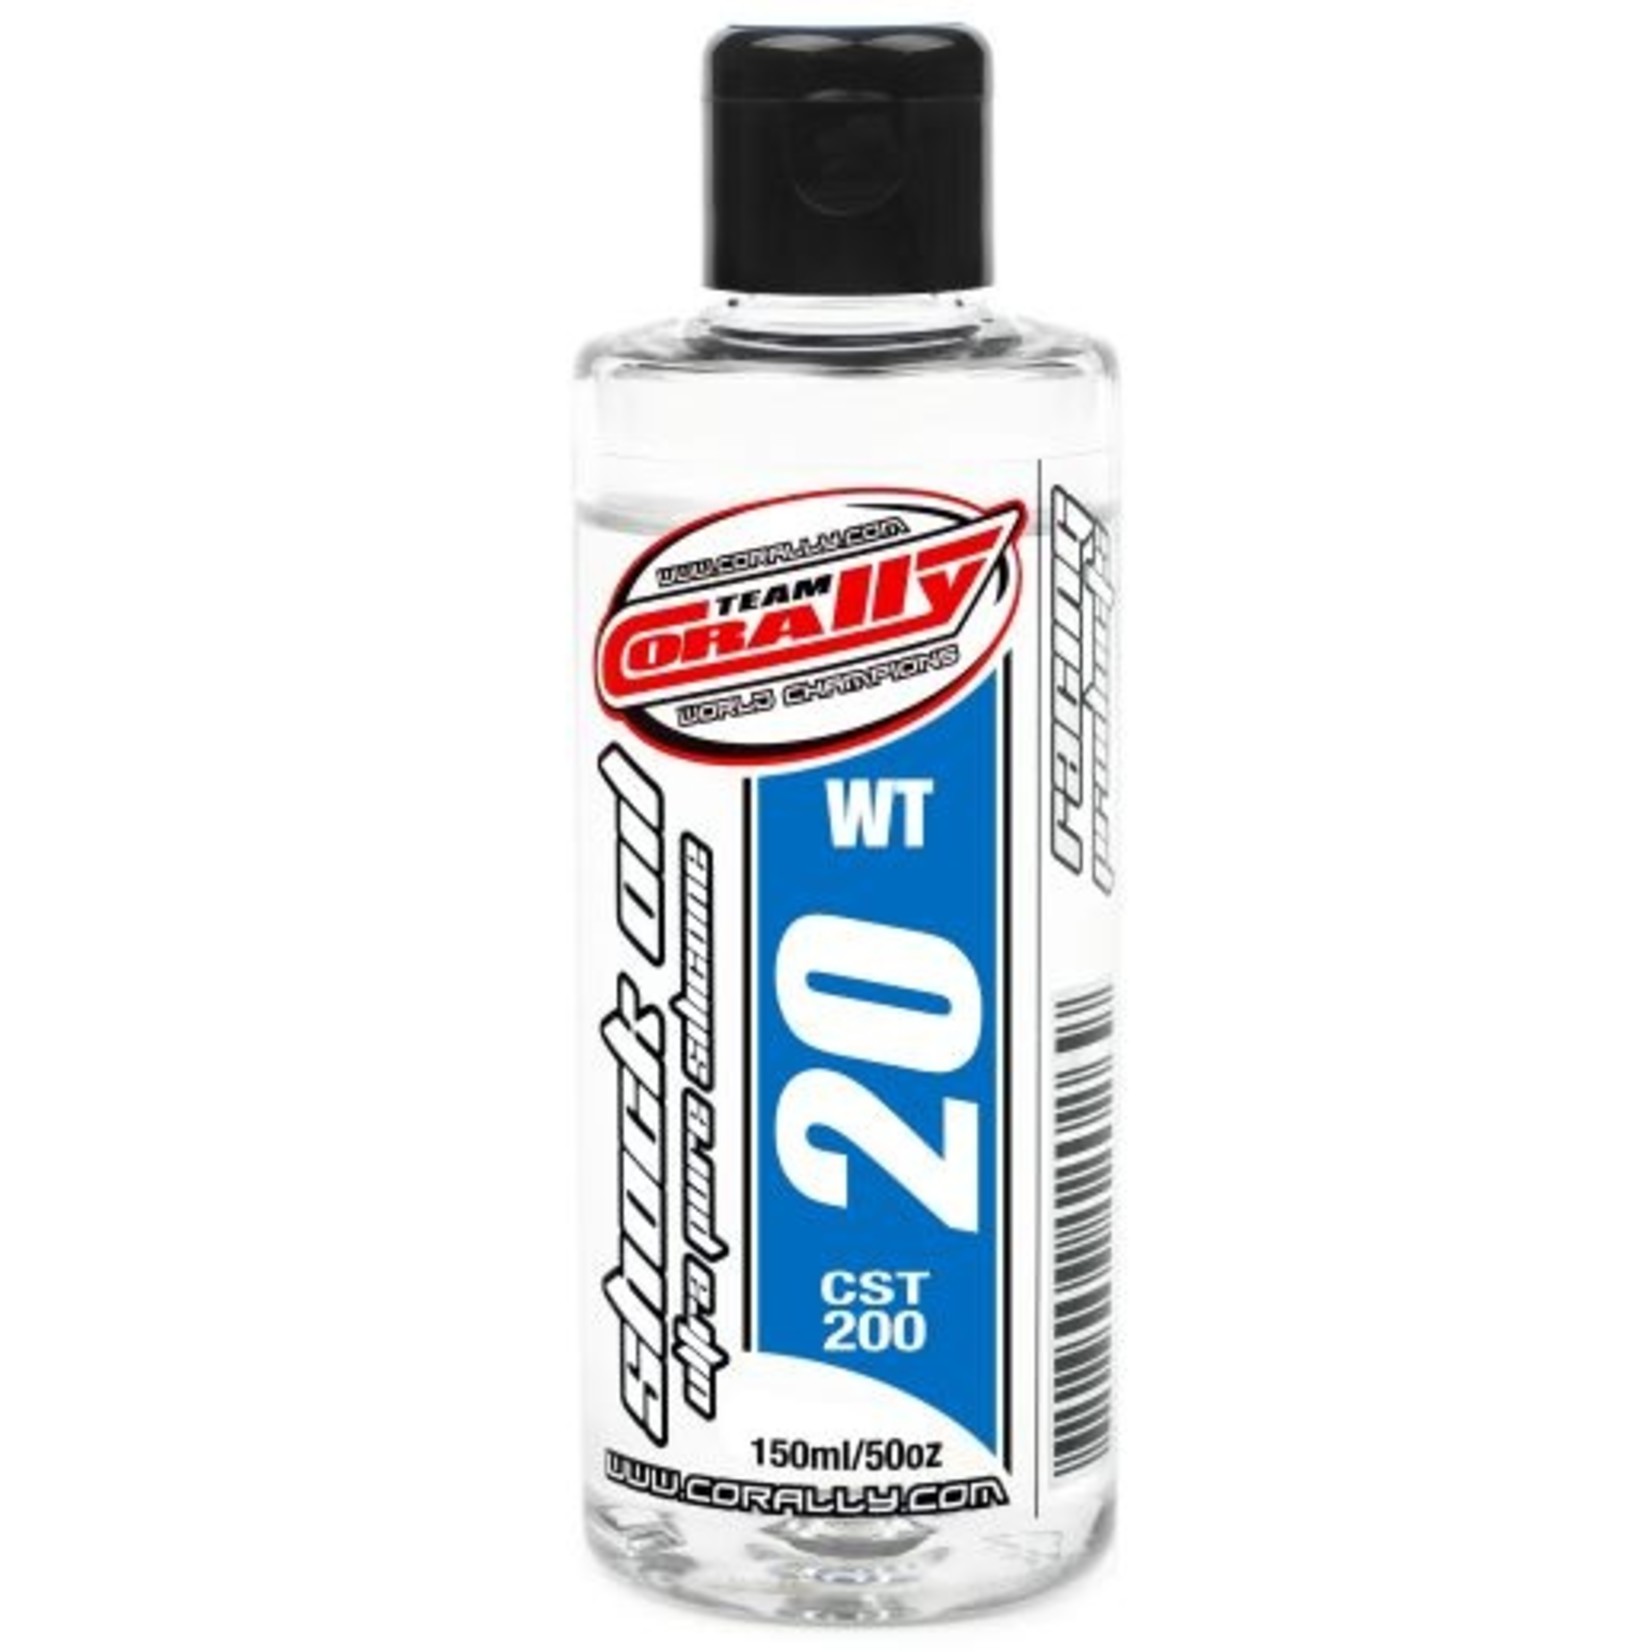 Corally (Team Corally) Ultra Pure Silicone Shock Oil - 20 WT - 150ml